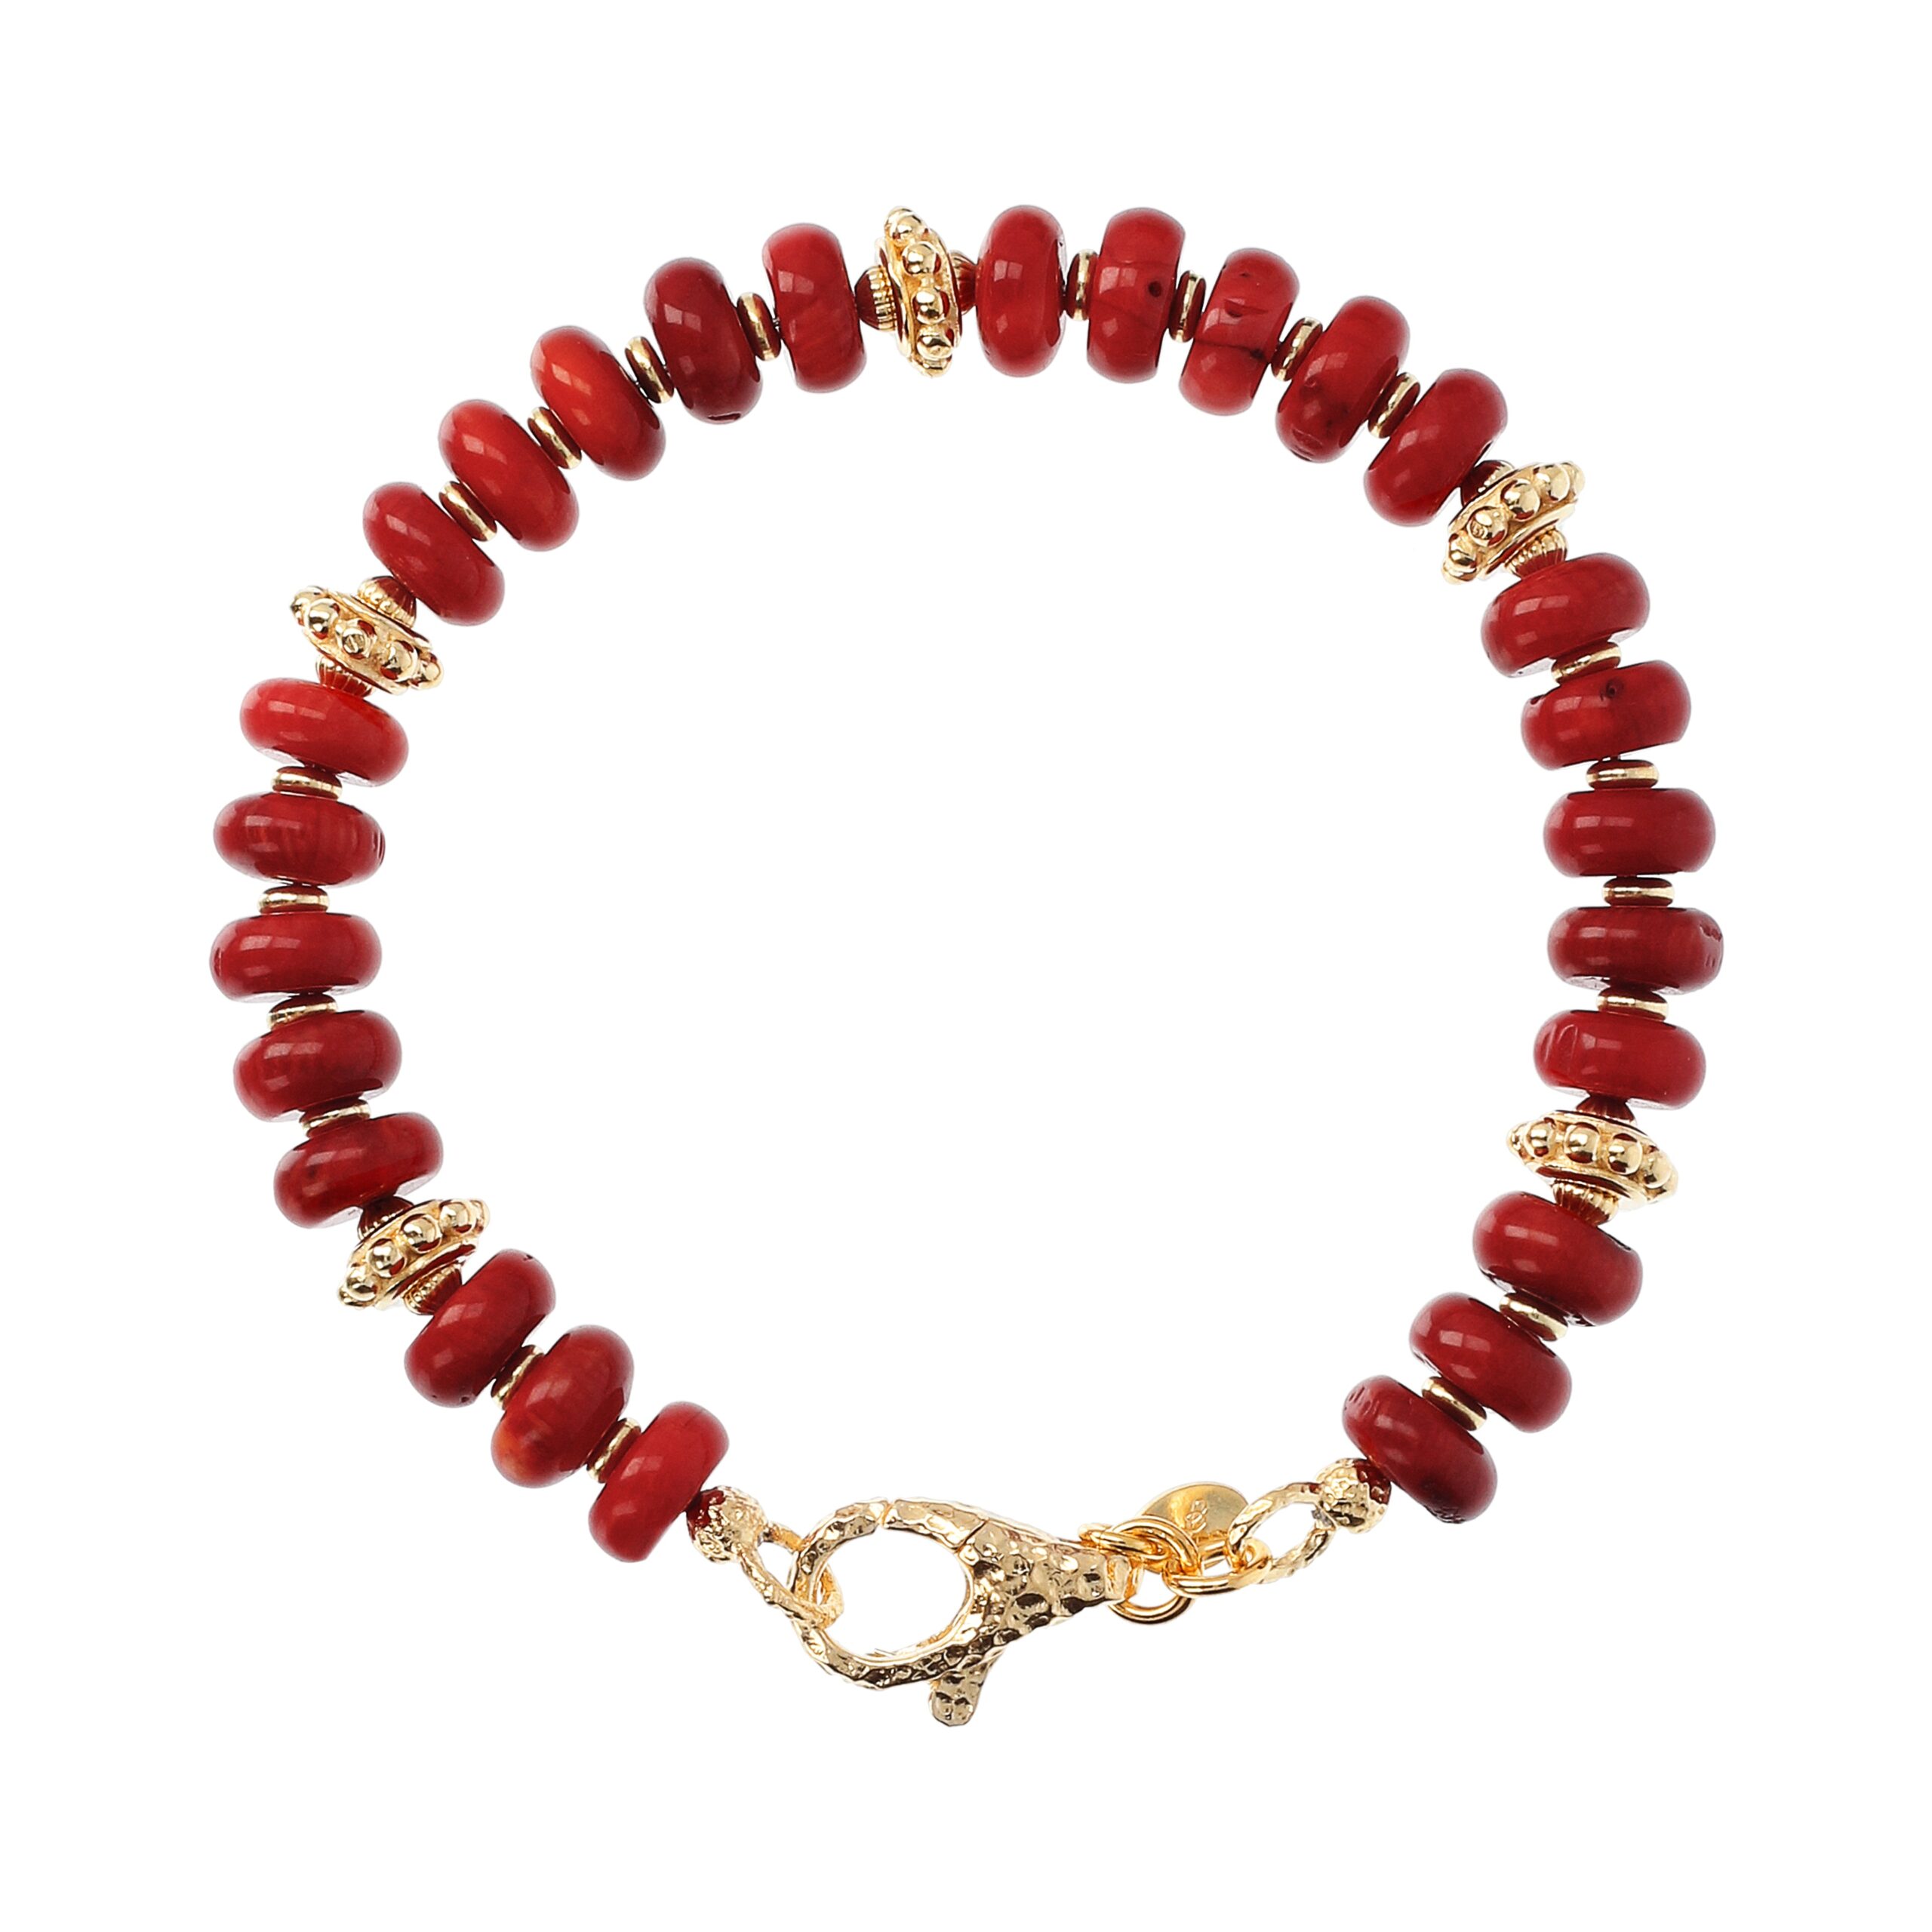 Bellissimo Bronzo Italian Red Coral and Textured Gemstone Bracelet-7-1/4″